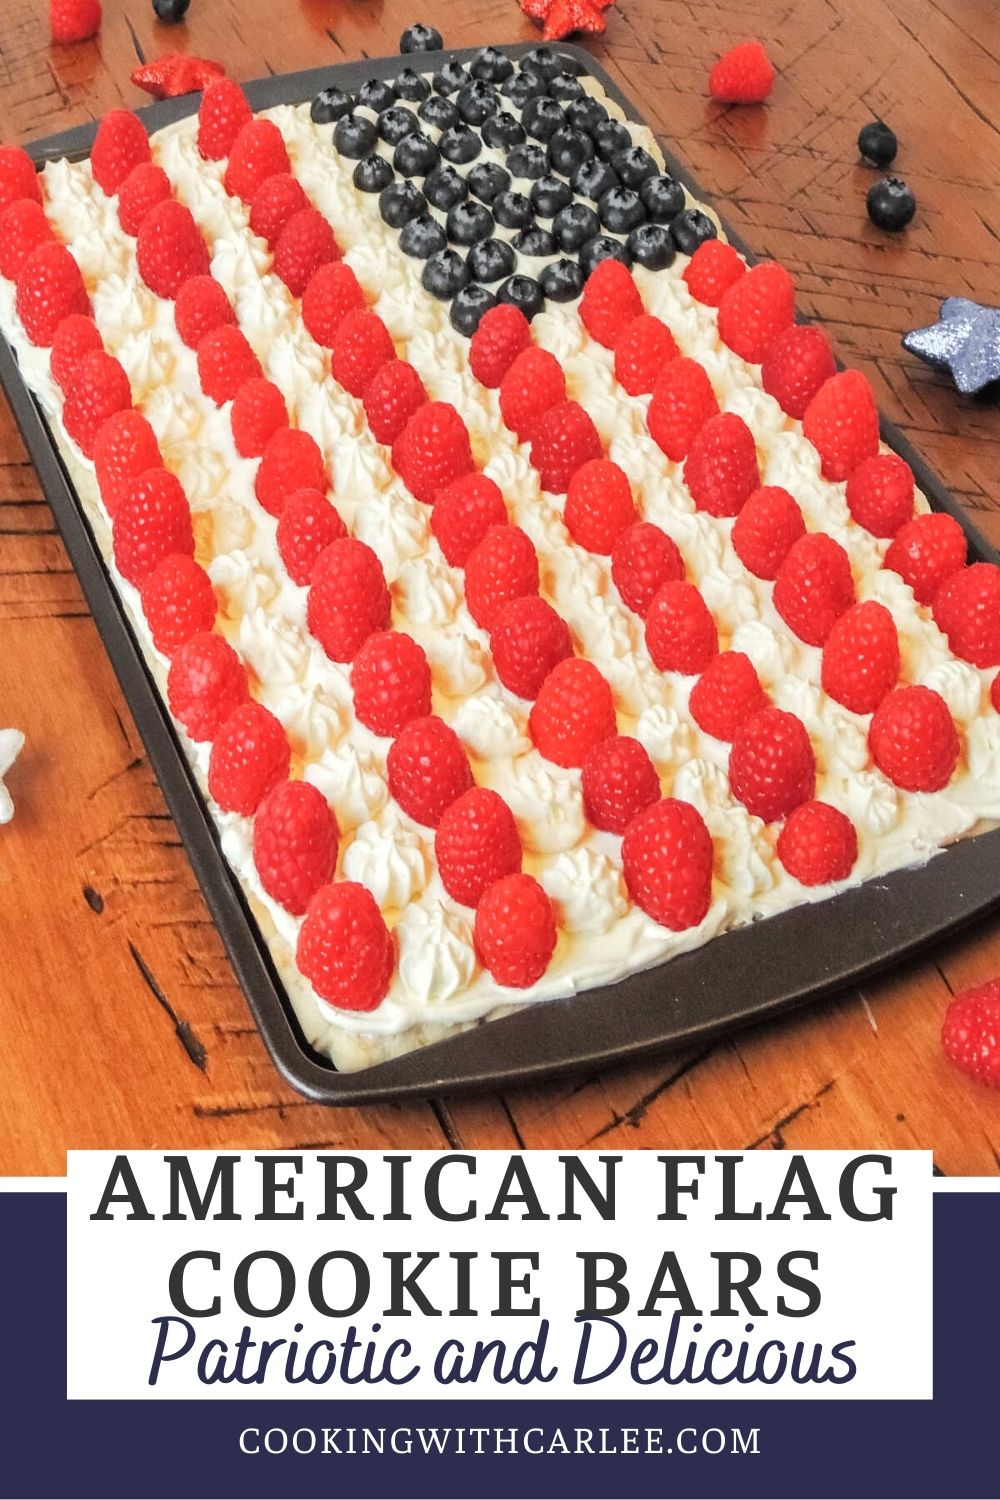 These easy homemade cookie bars use blueberries, raspberries and an easy white vanilla frosting to make an American flag. The homemade cookie base is part sugar cookie with a little bit of oatmeal for texture.